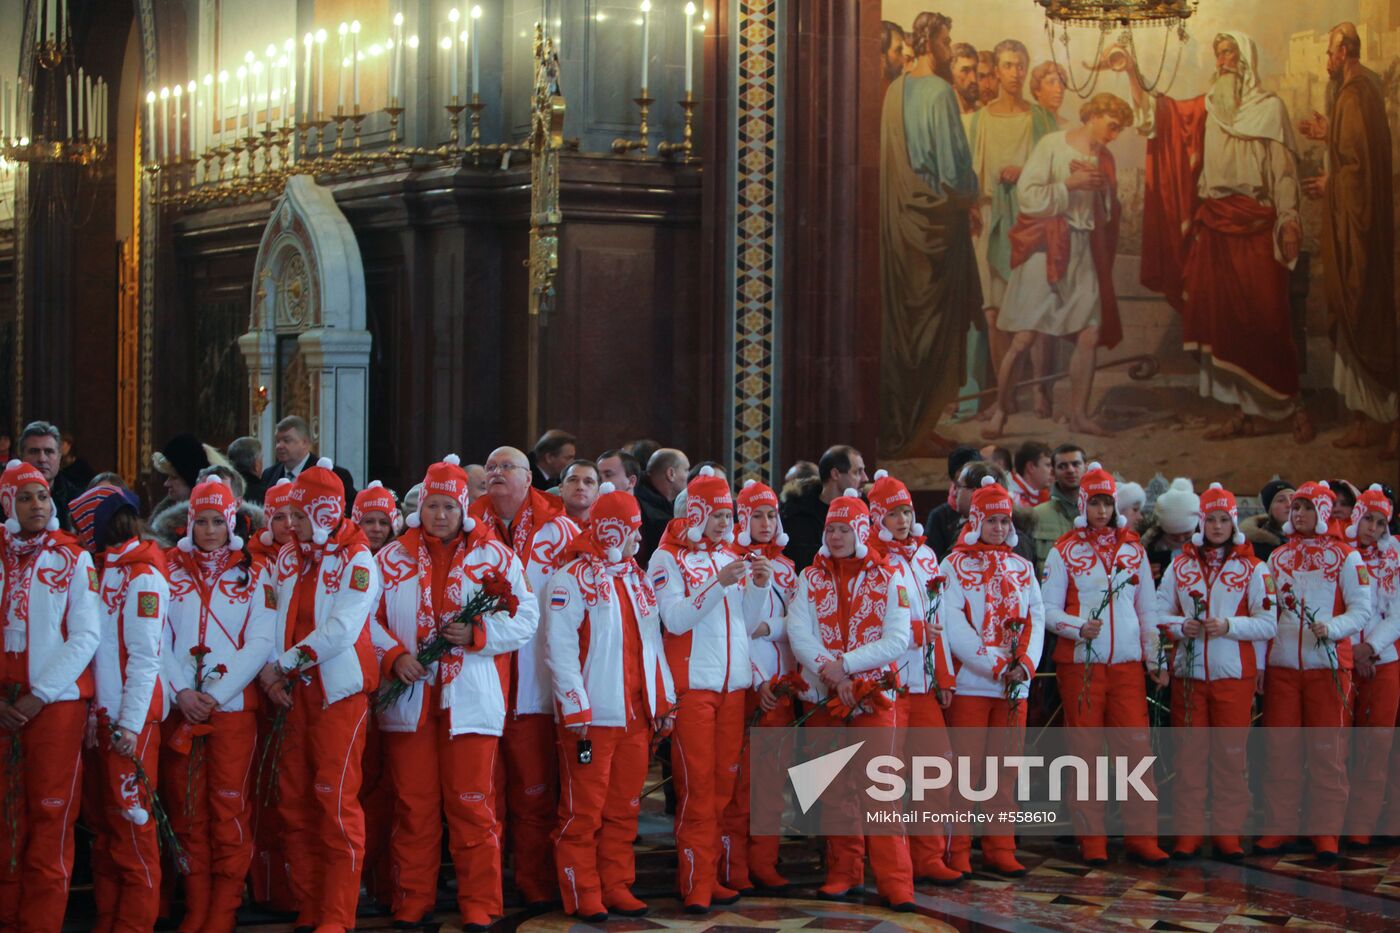 Savior Cathedral hosts Russia's Vancouver Olympians